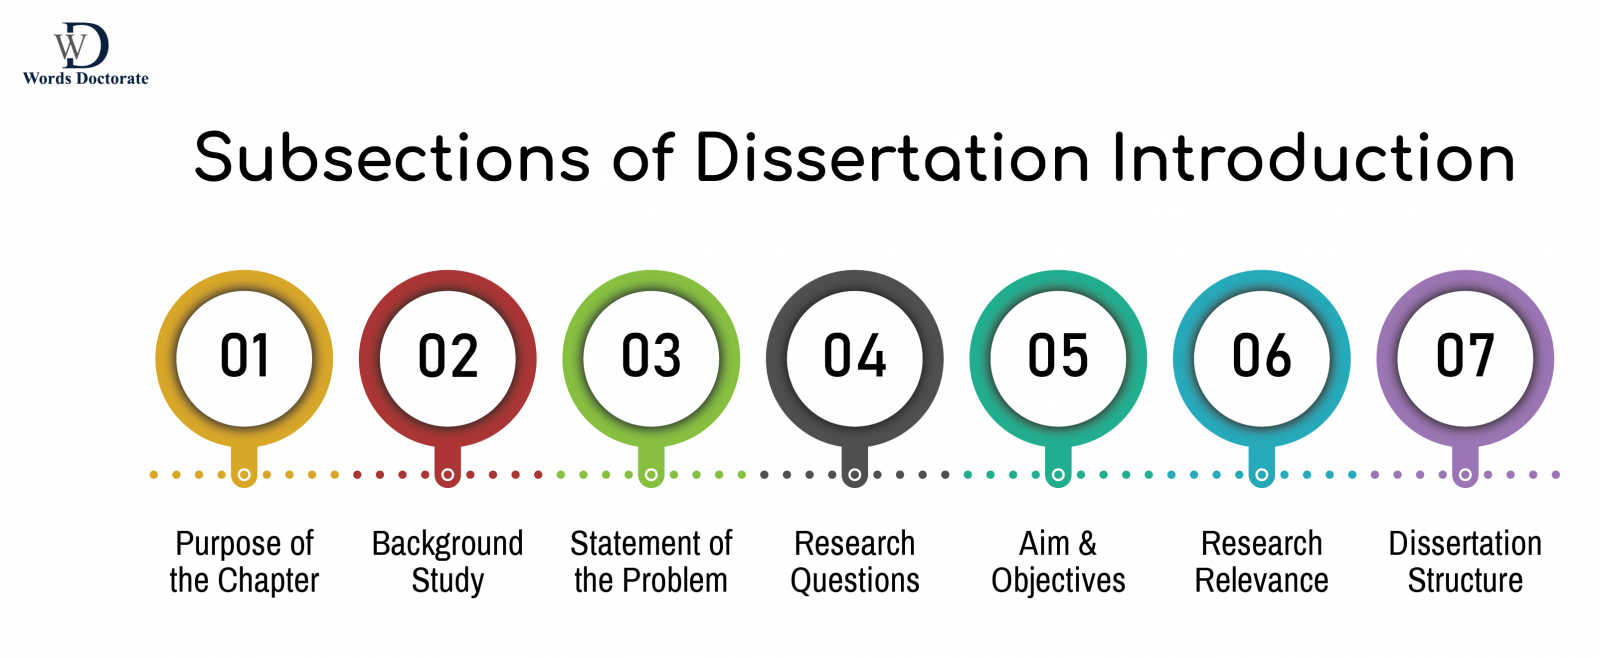 Figure 2 Subsections of Dissertation Introduction